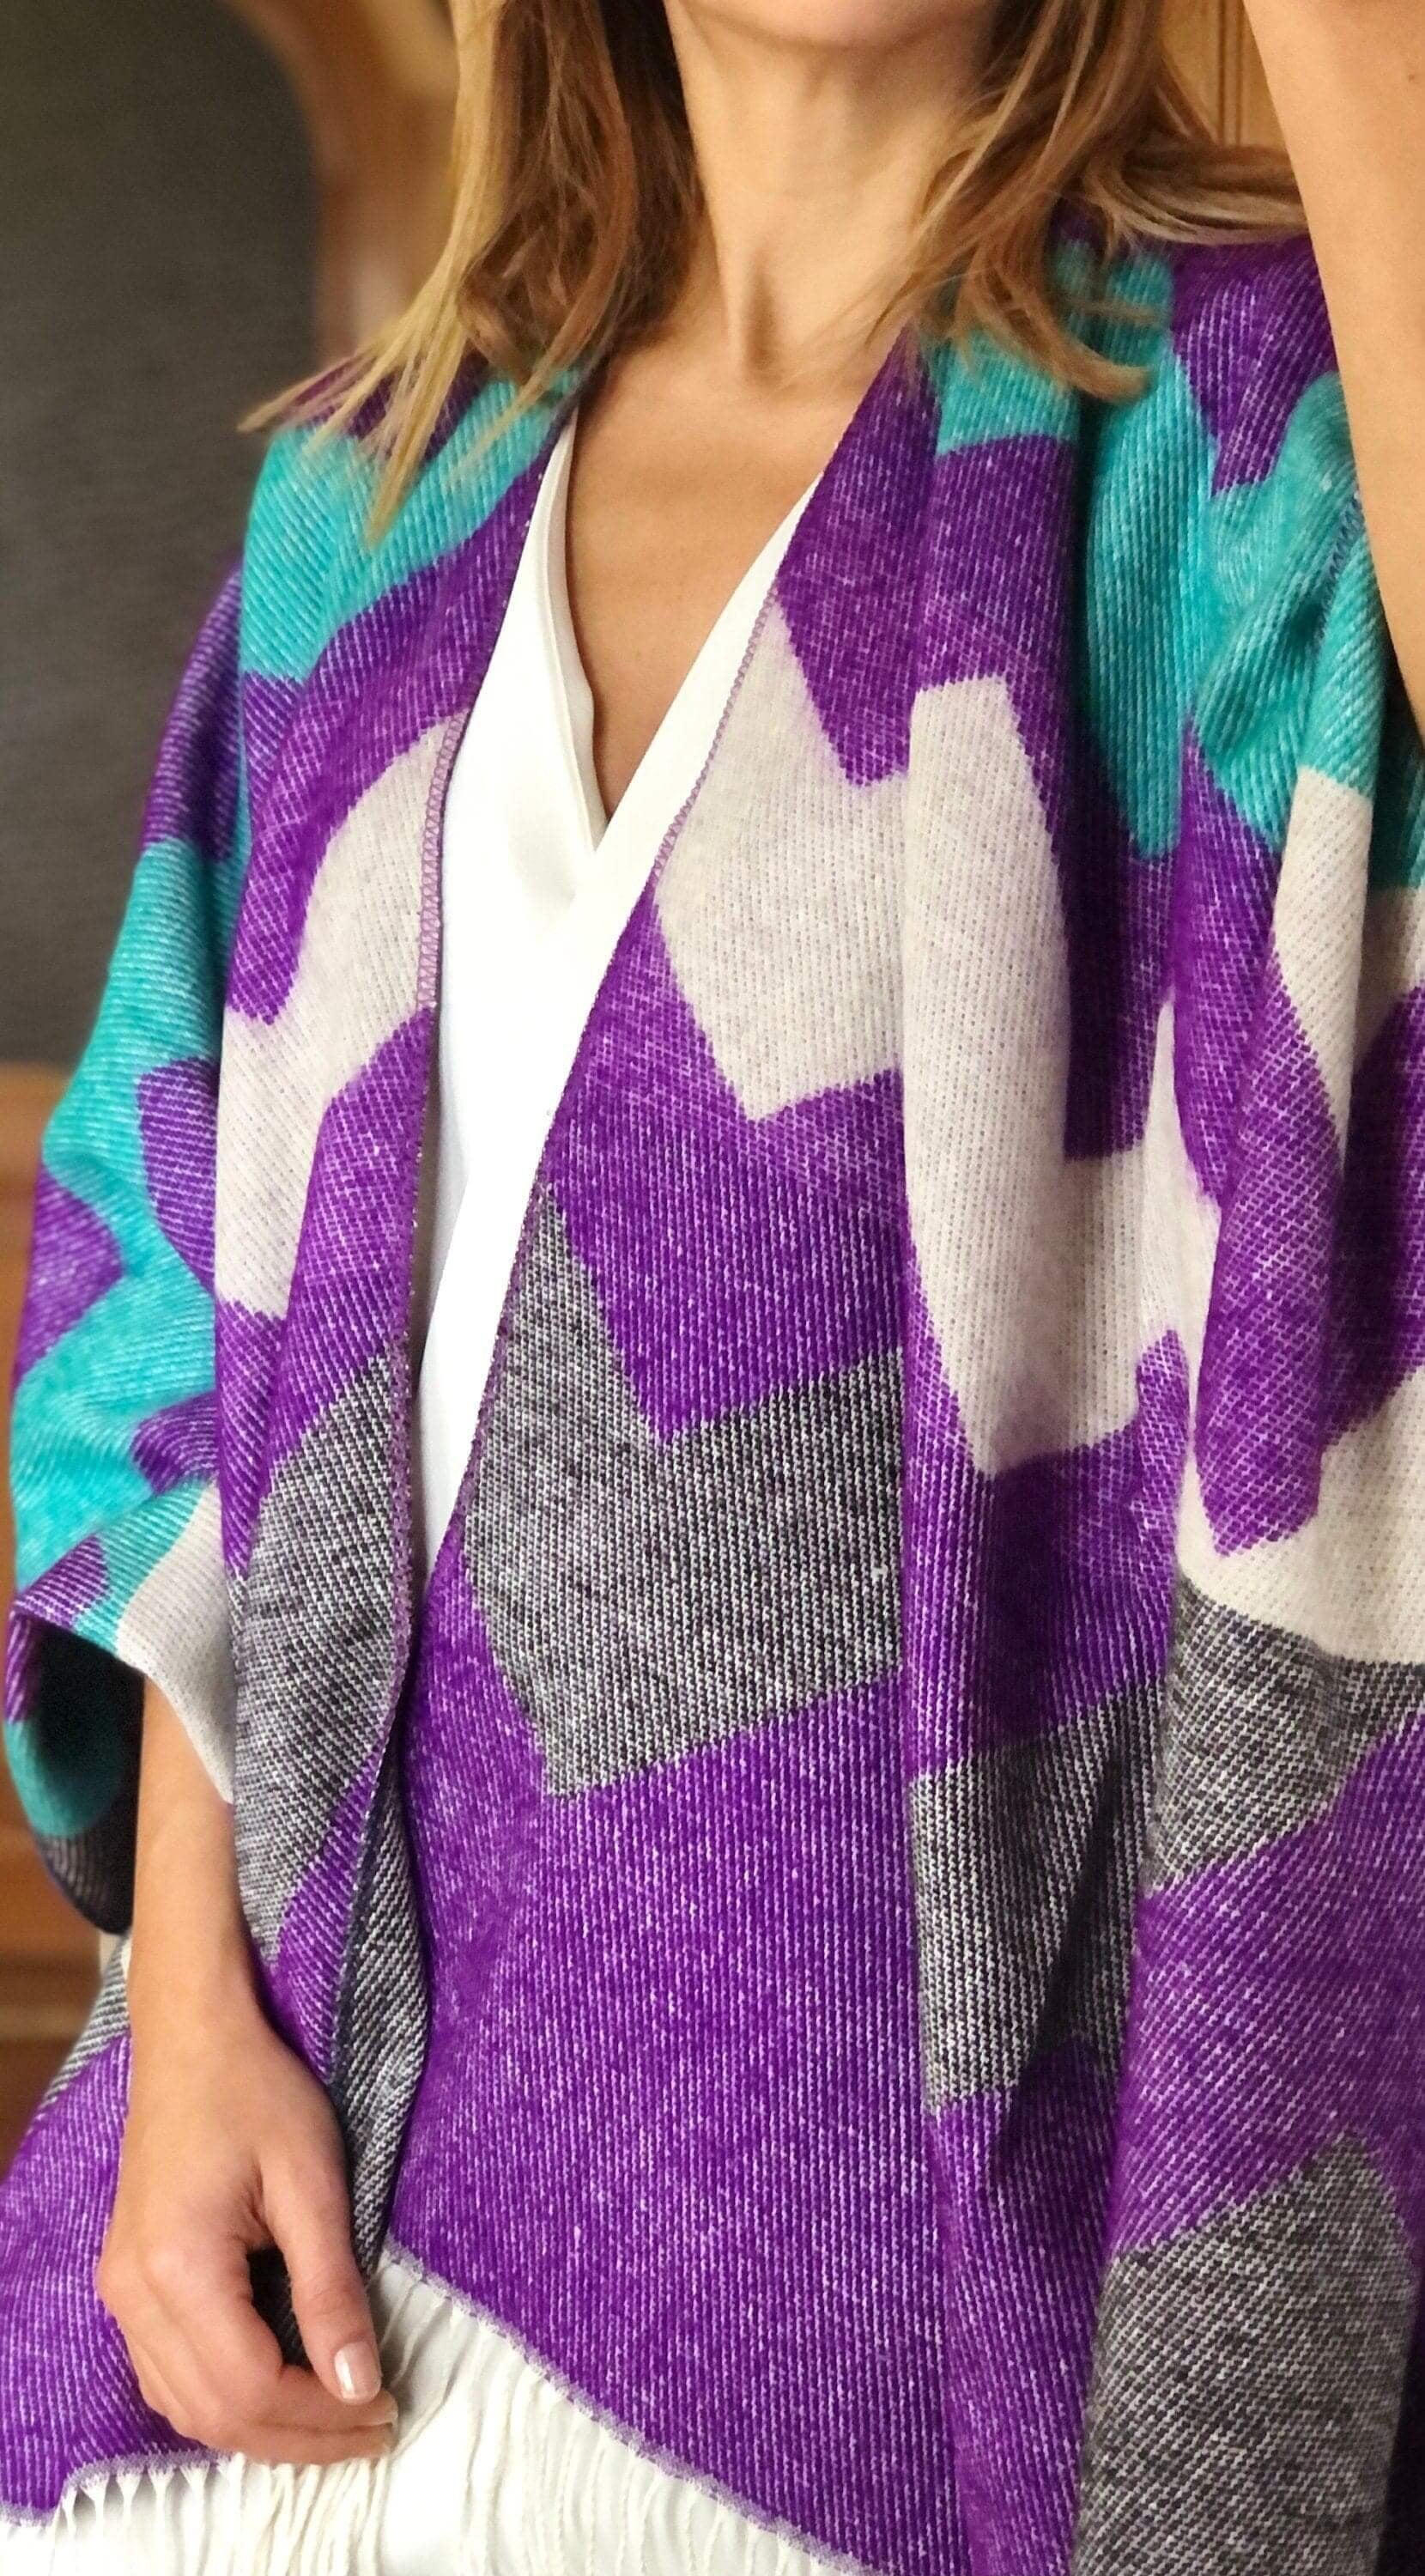 Gift for mum: Purple, gray, white, and blue wool blend poncho shawl